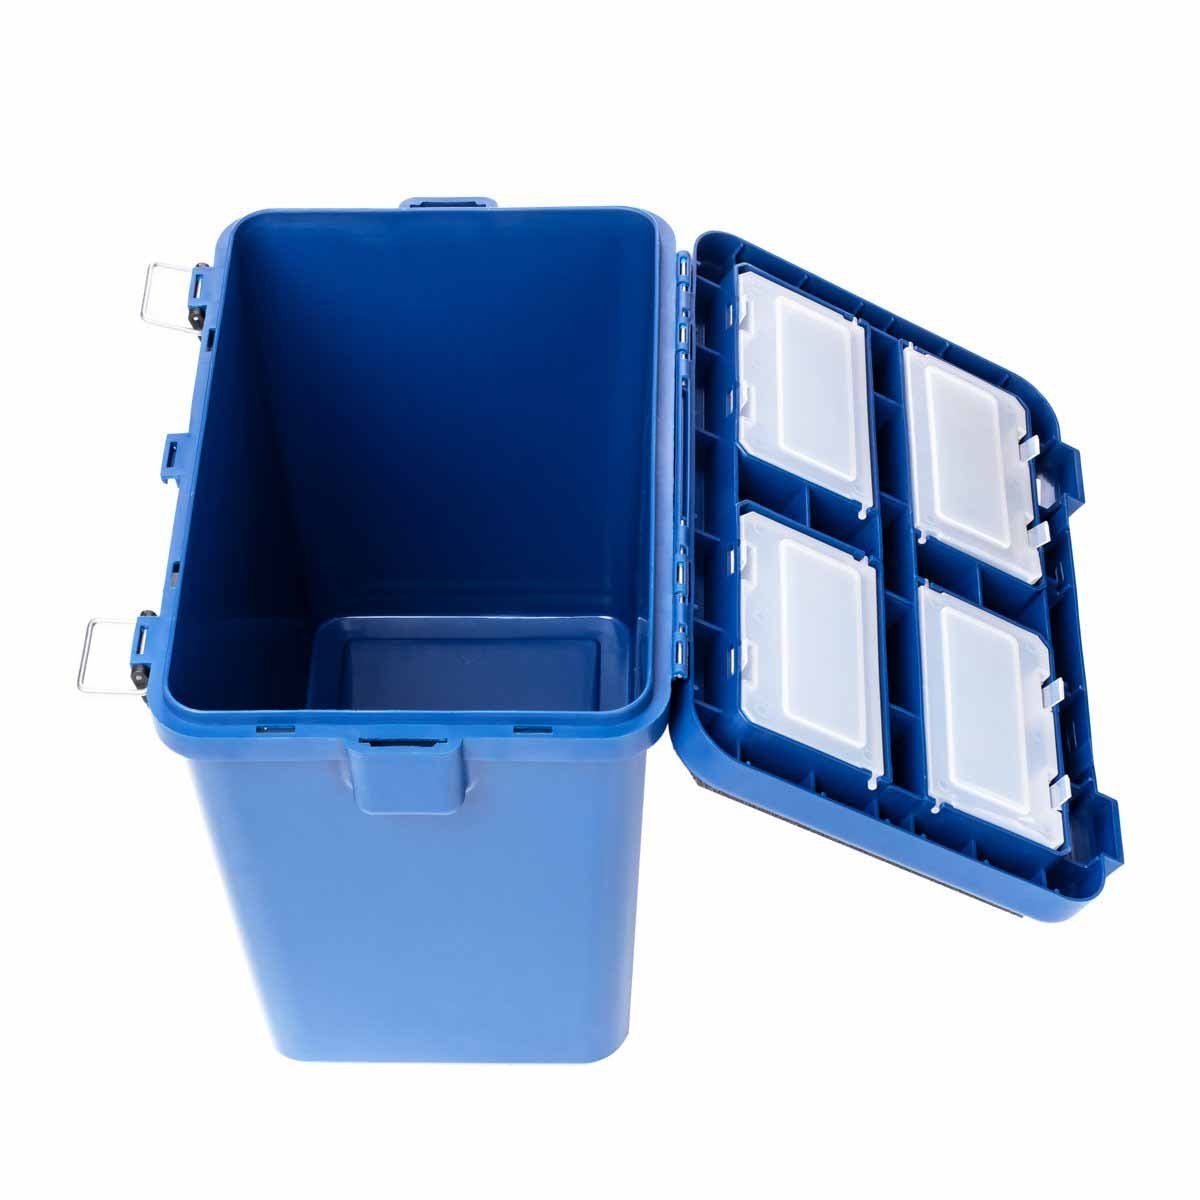 ce Fishing Bucket Type Box with Seat and Adjustable Shoulder Strap has one big compartment for tackle storage